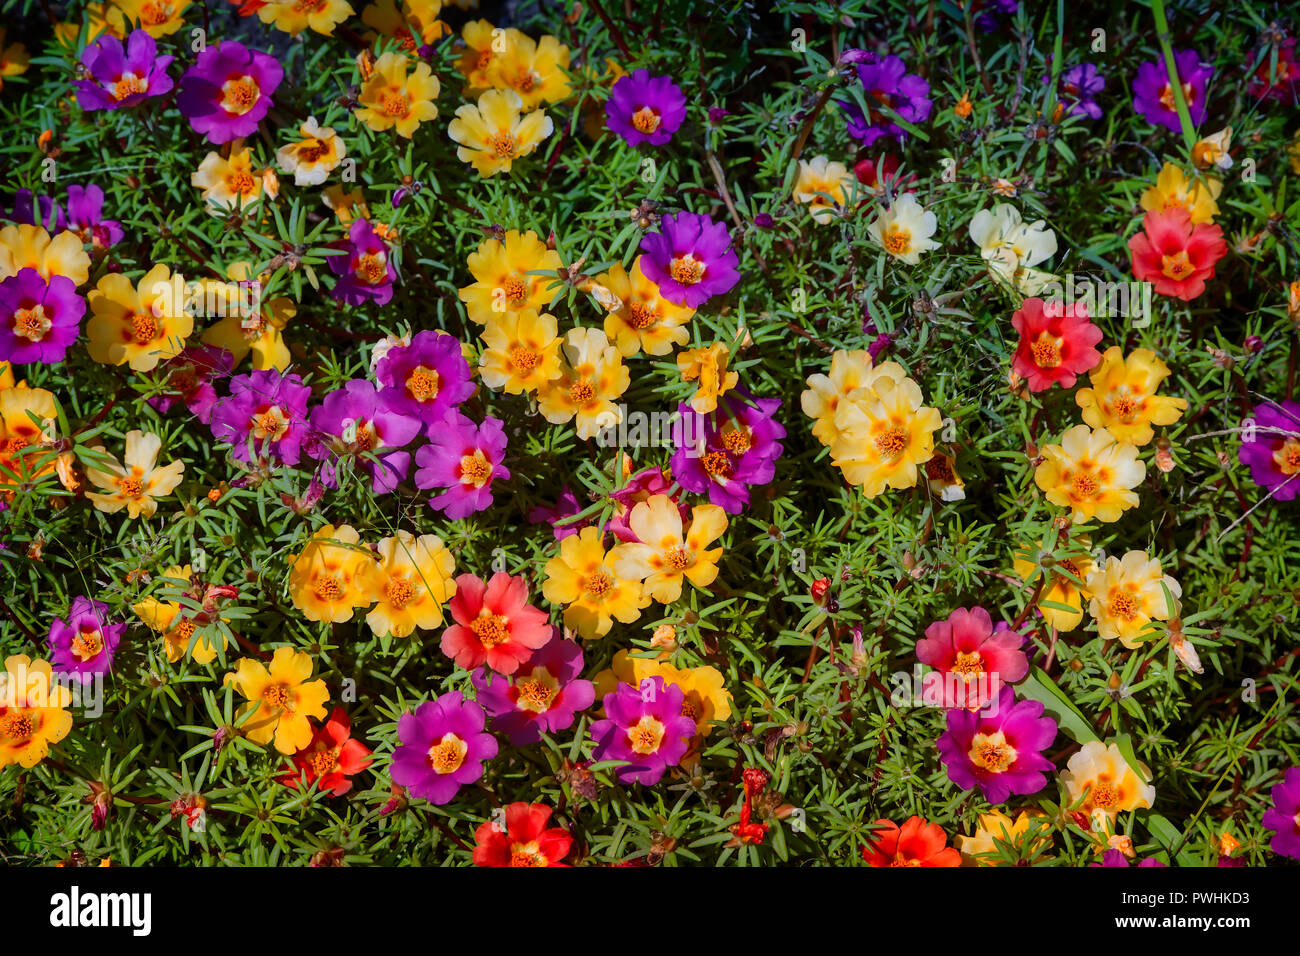 On a bed of beautiful flowers bloom Portulaca, a variety of colors. Presented close-up. Stock Photo